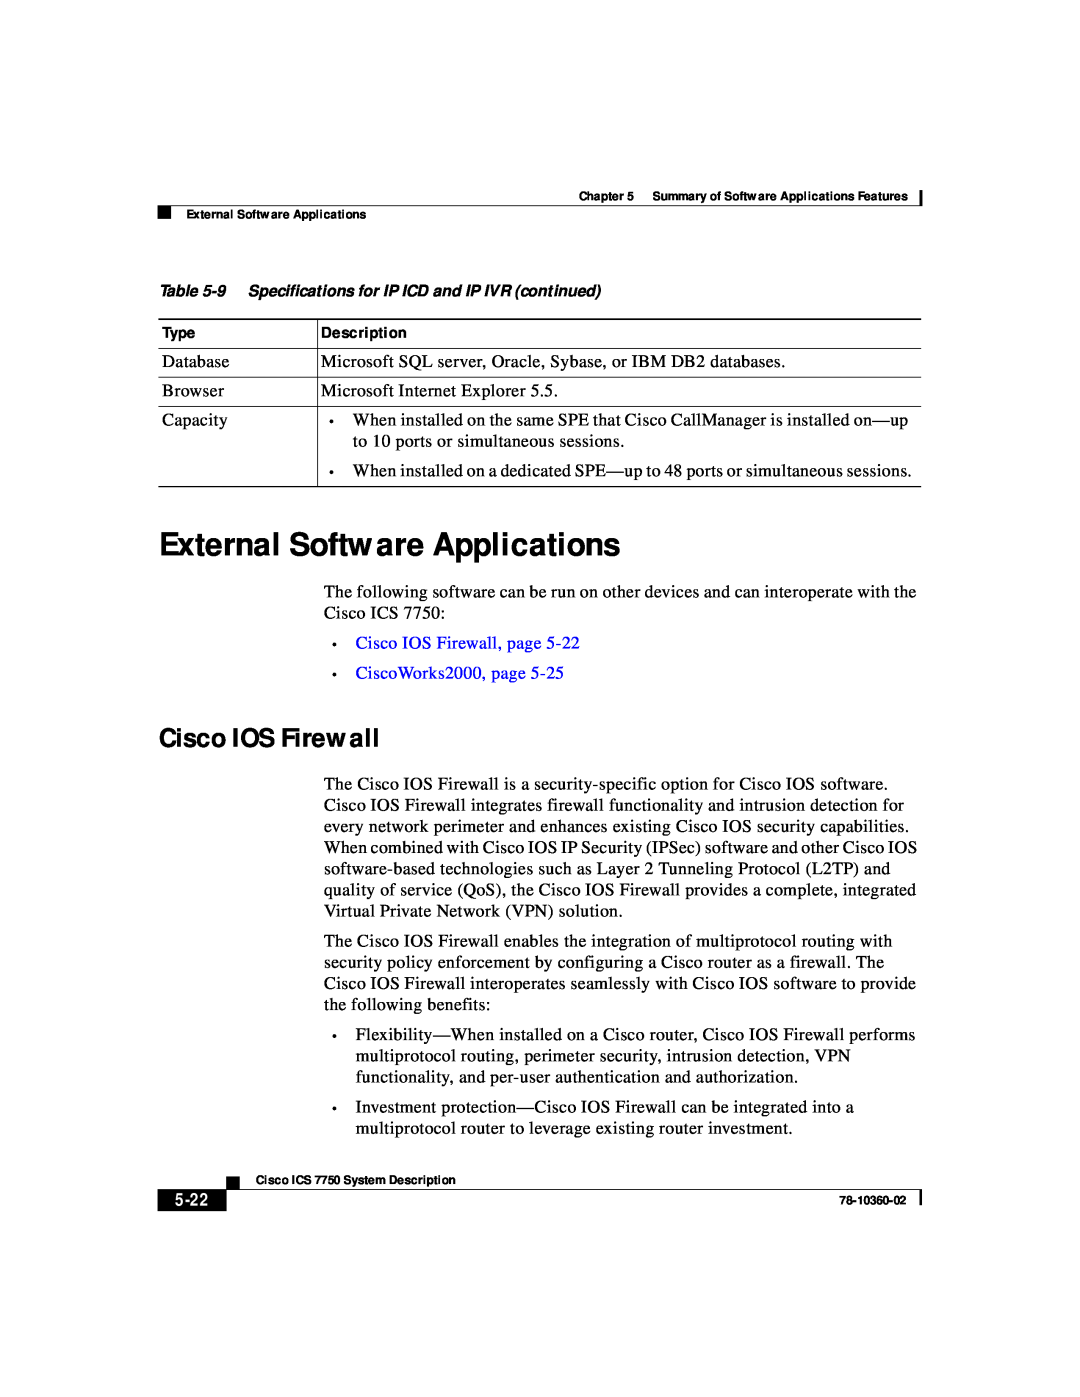 Cisco Systems ICS-7750 manual External Software Applications, Cisco IOS Firewall, page CiscoWorks2000, page, 5-22 